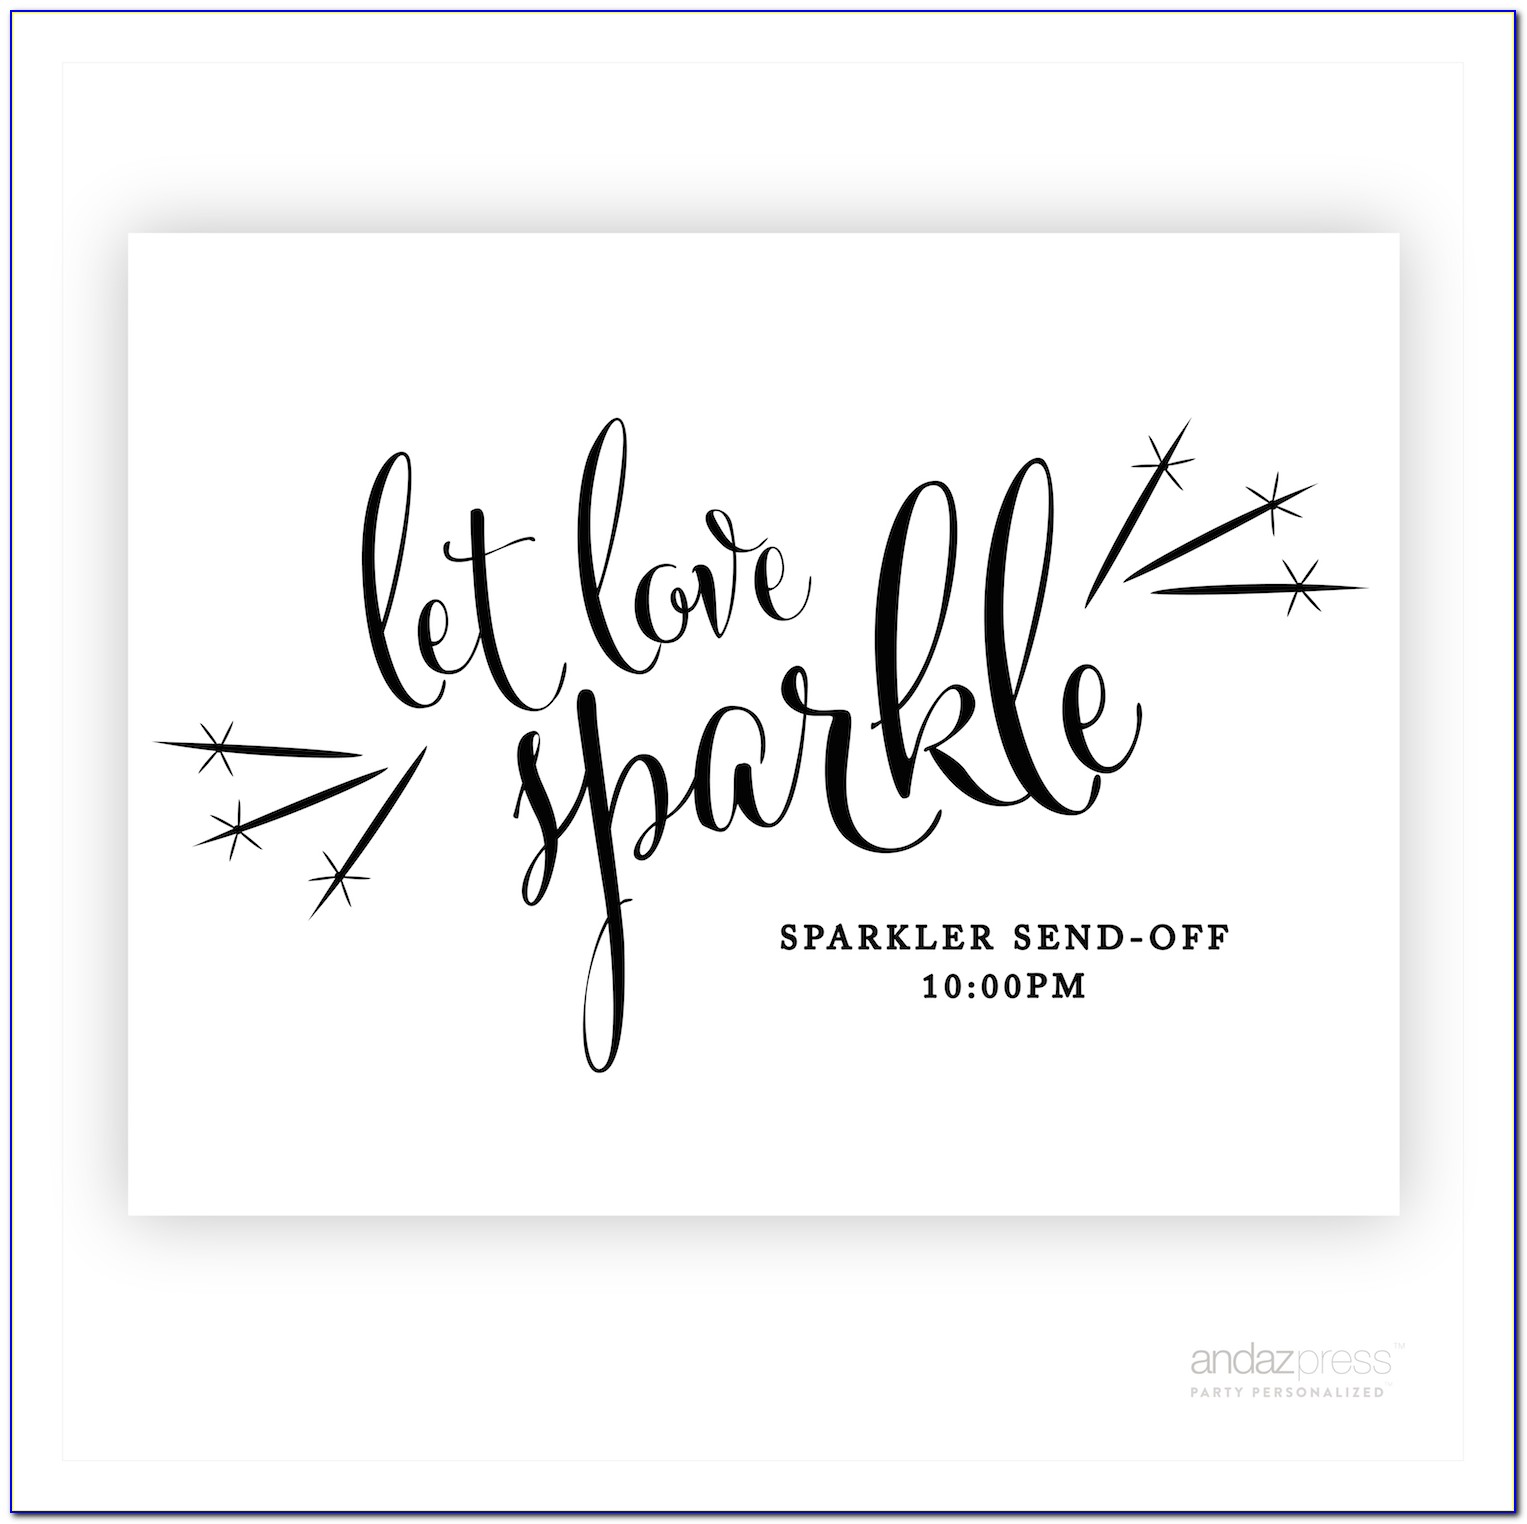 Ap10245 Andaz Press Wedding Party Signs, Formal Black And White, 8.5 Inch X 11 Inch, Mr. & Mrs